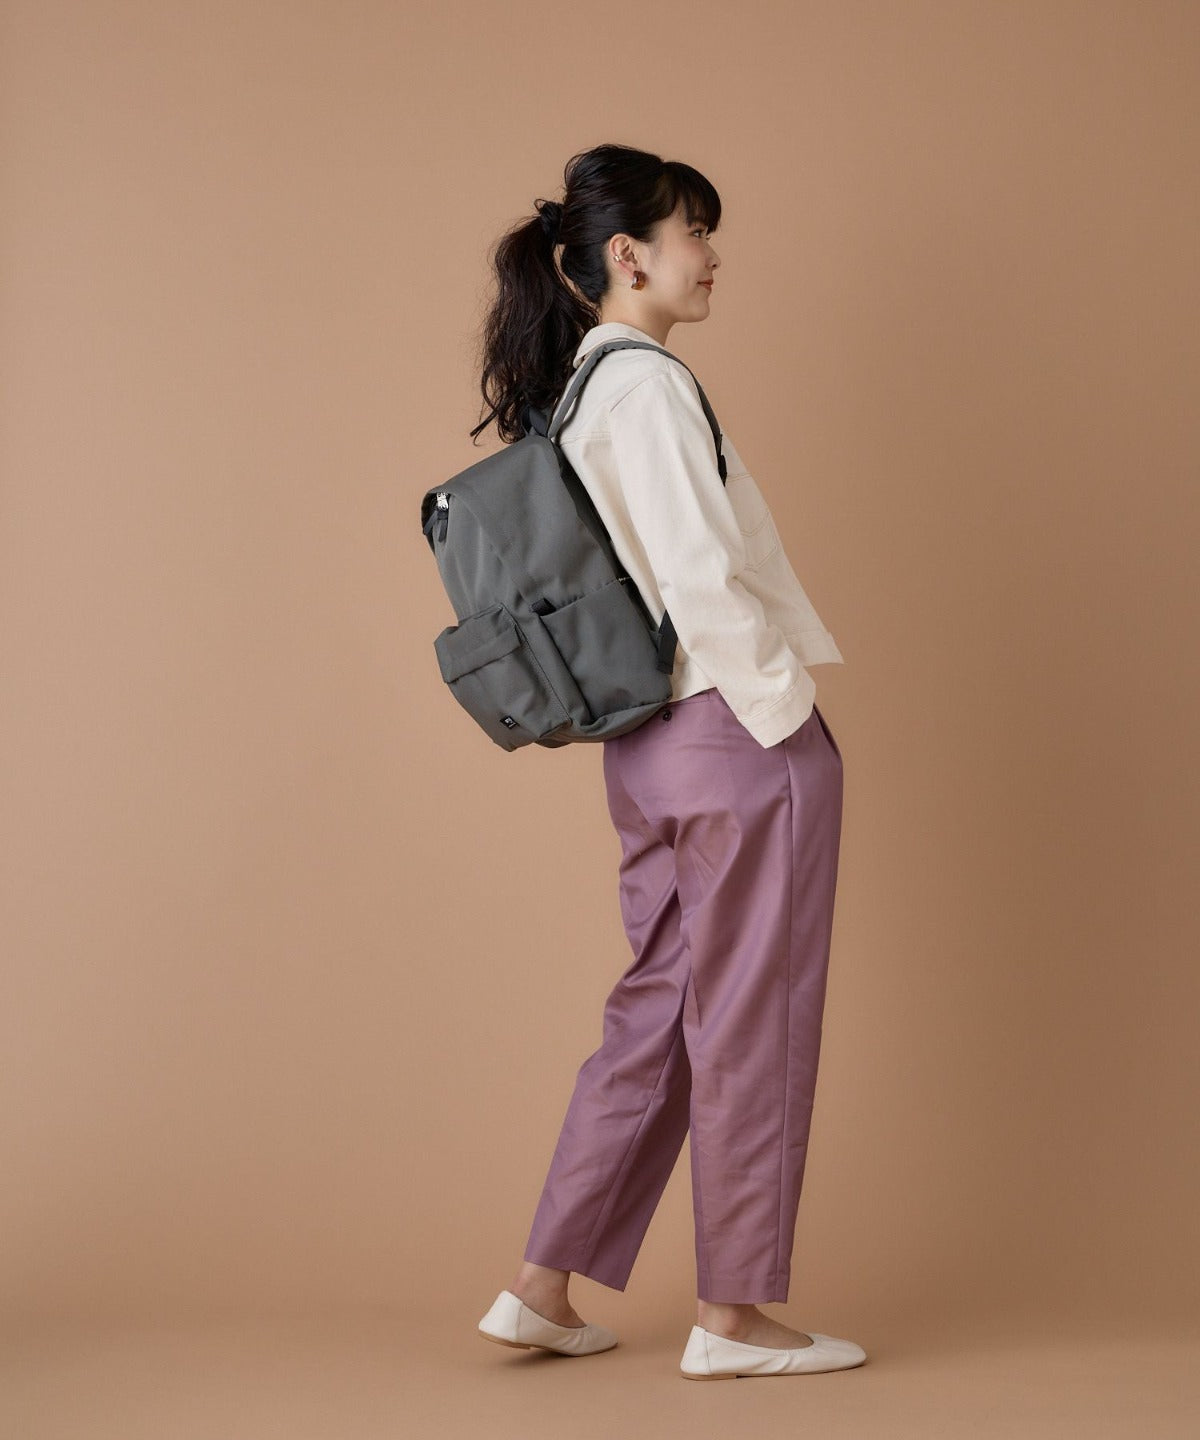 Anello Togo Backpack in Grey